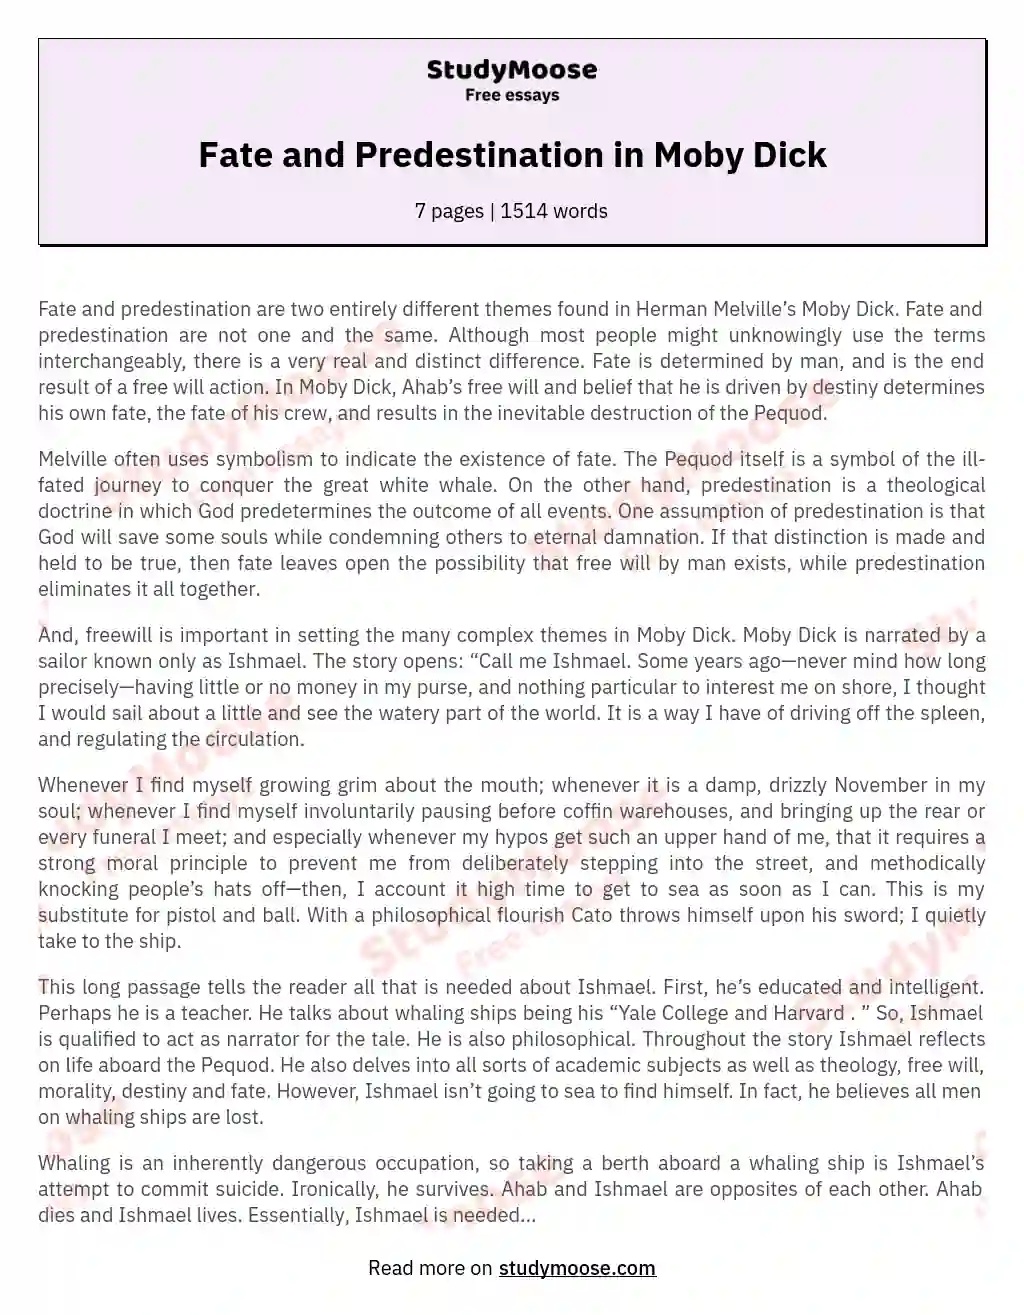 Fate and Predestination in Moby Dick essay